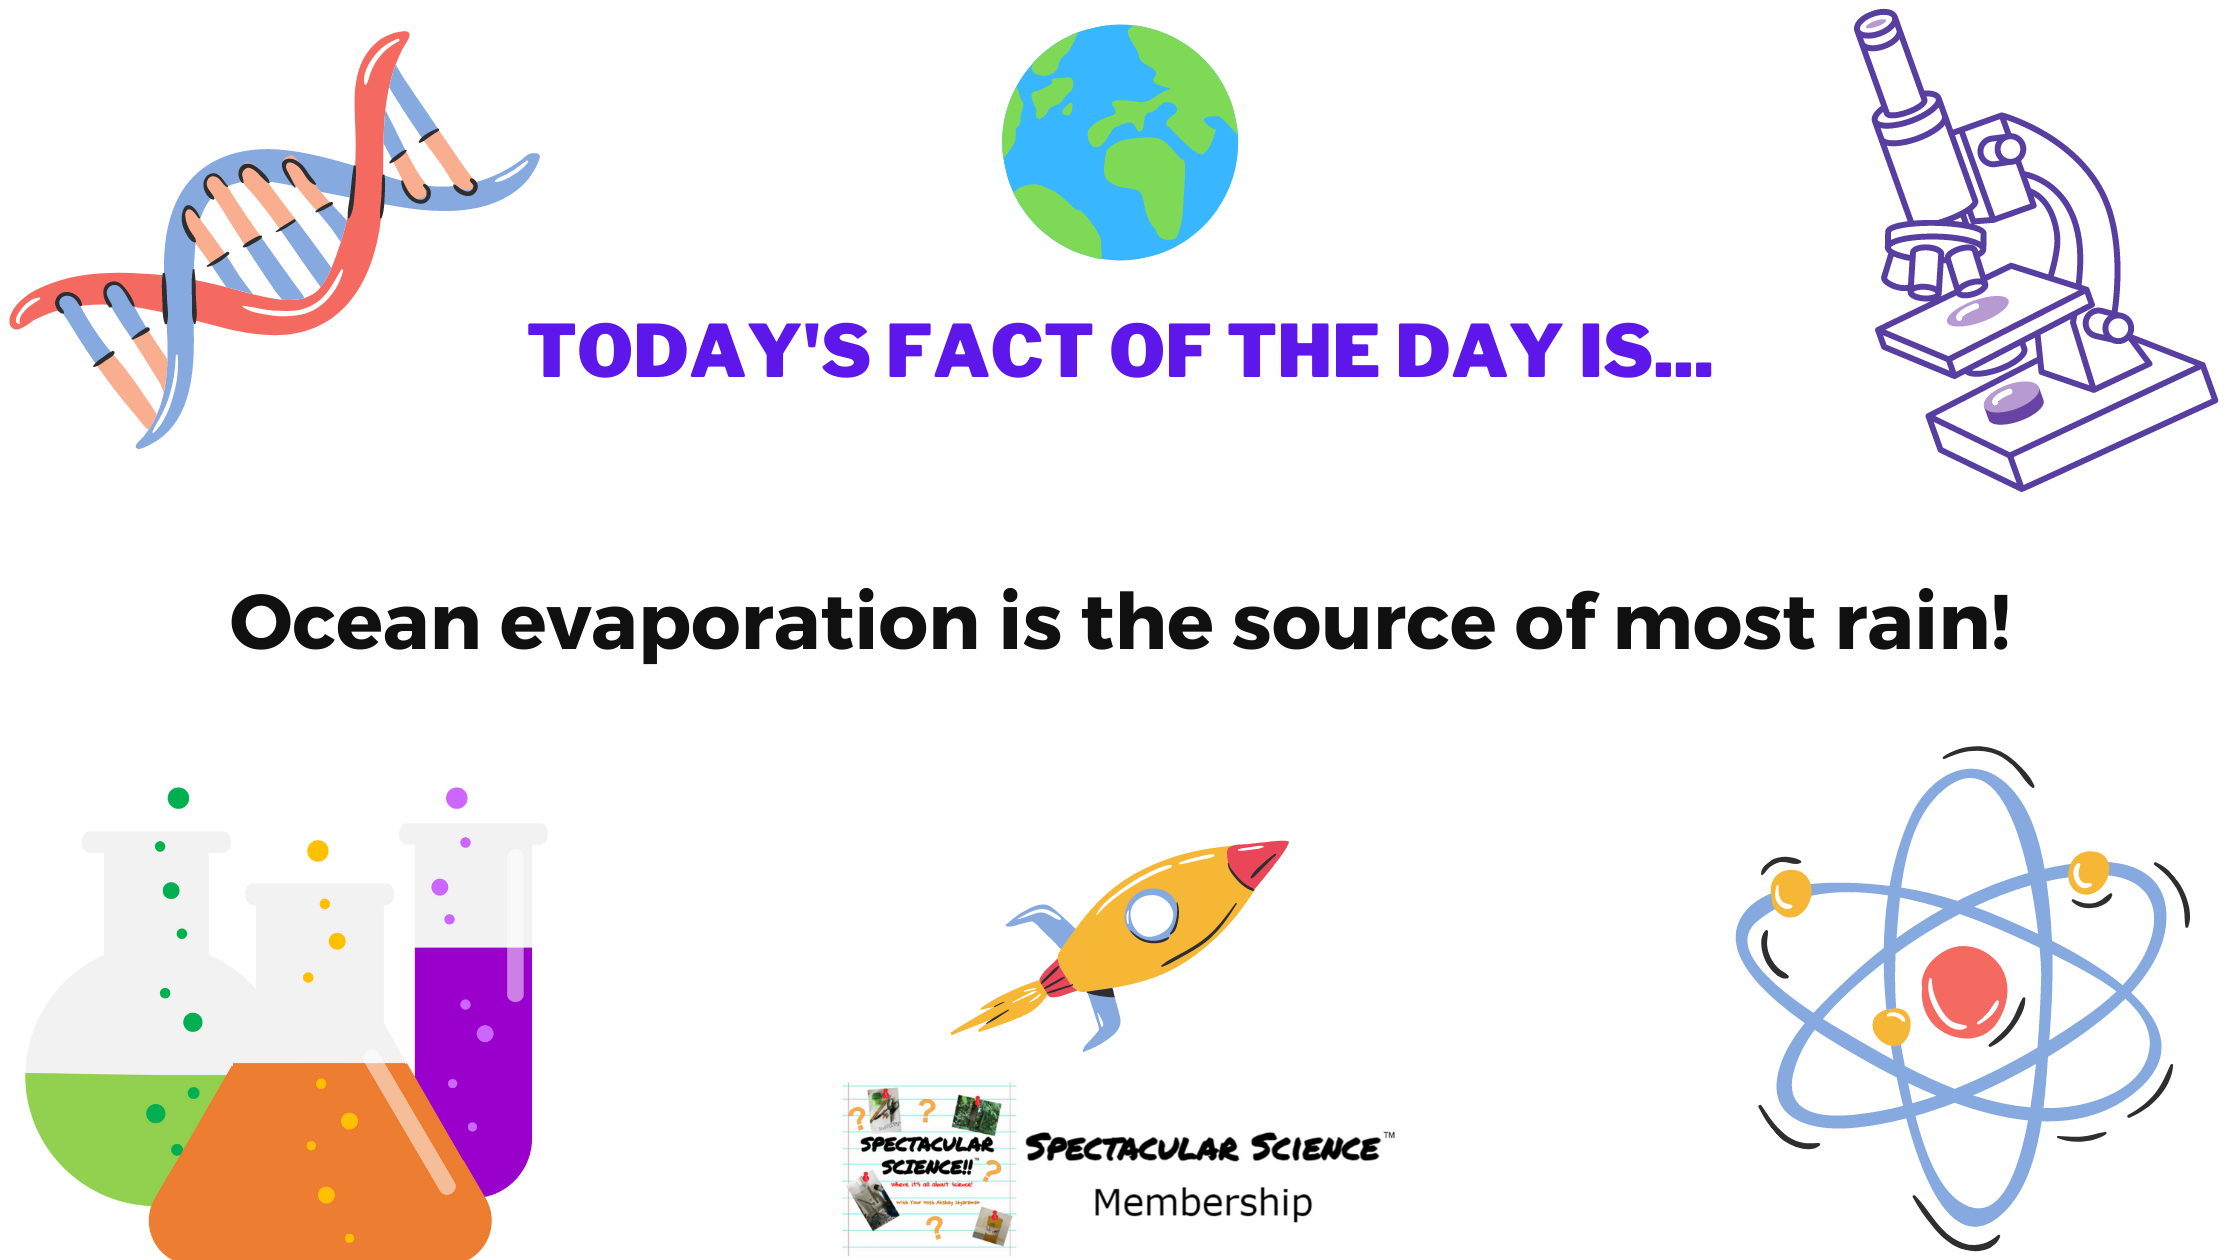 Fact of the Day Image June 18th